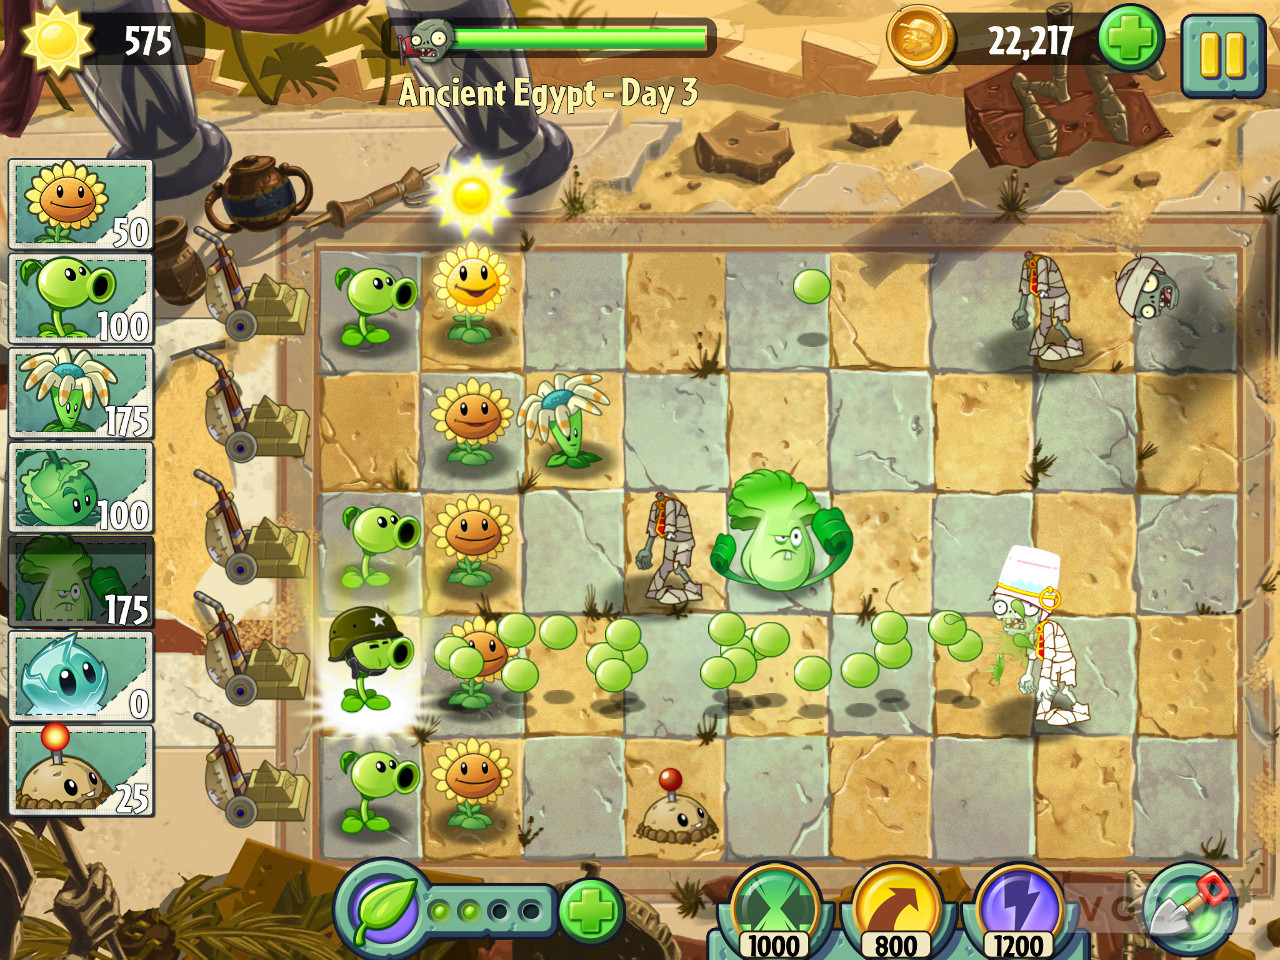 play plants vs zombies 2 online pc